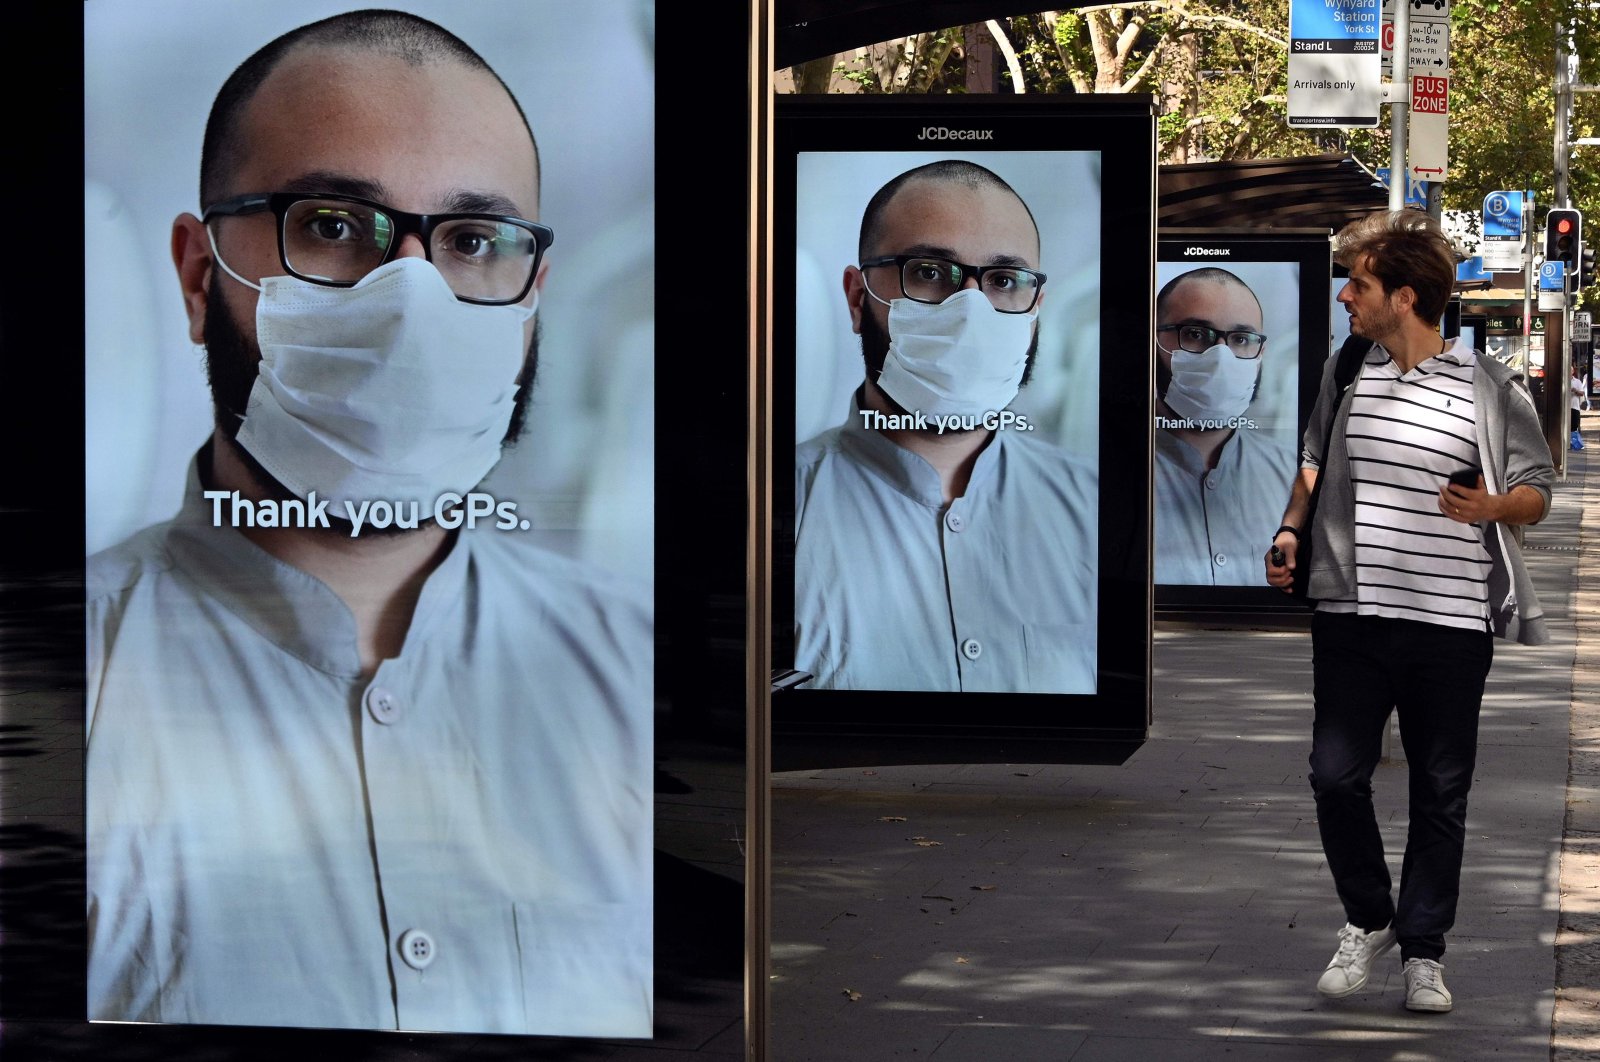 A man walks past bus stop advertising boards displaying thank you messages to health workers in response to the COVID-19 coronavirus outbreak, in Sydney on April 15, 2020. (AFP Photo)